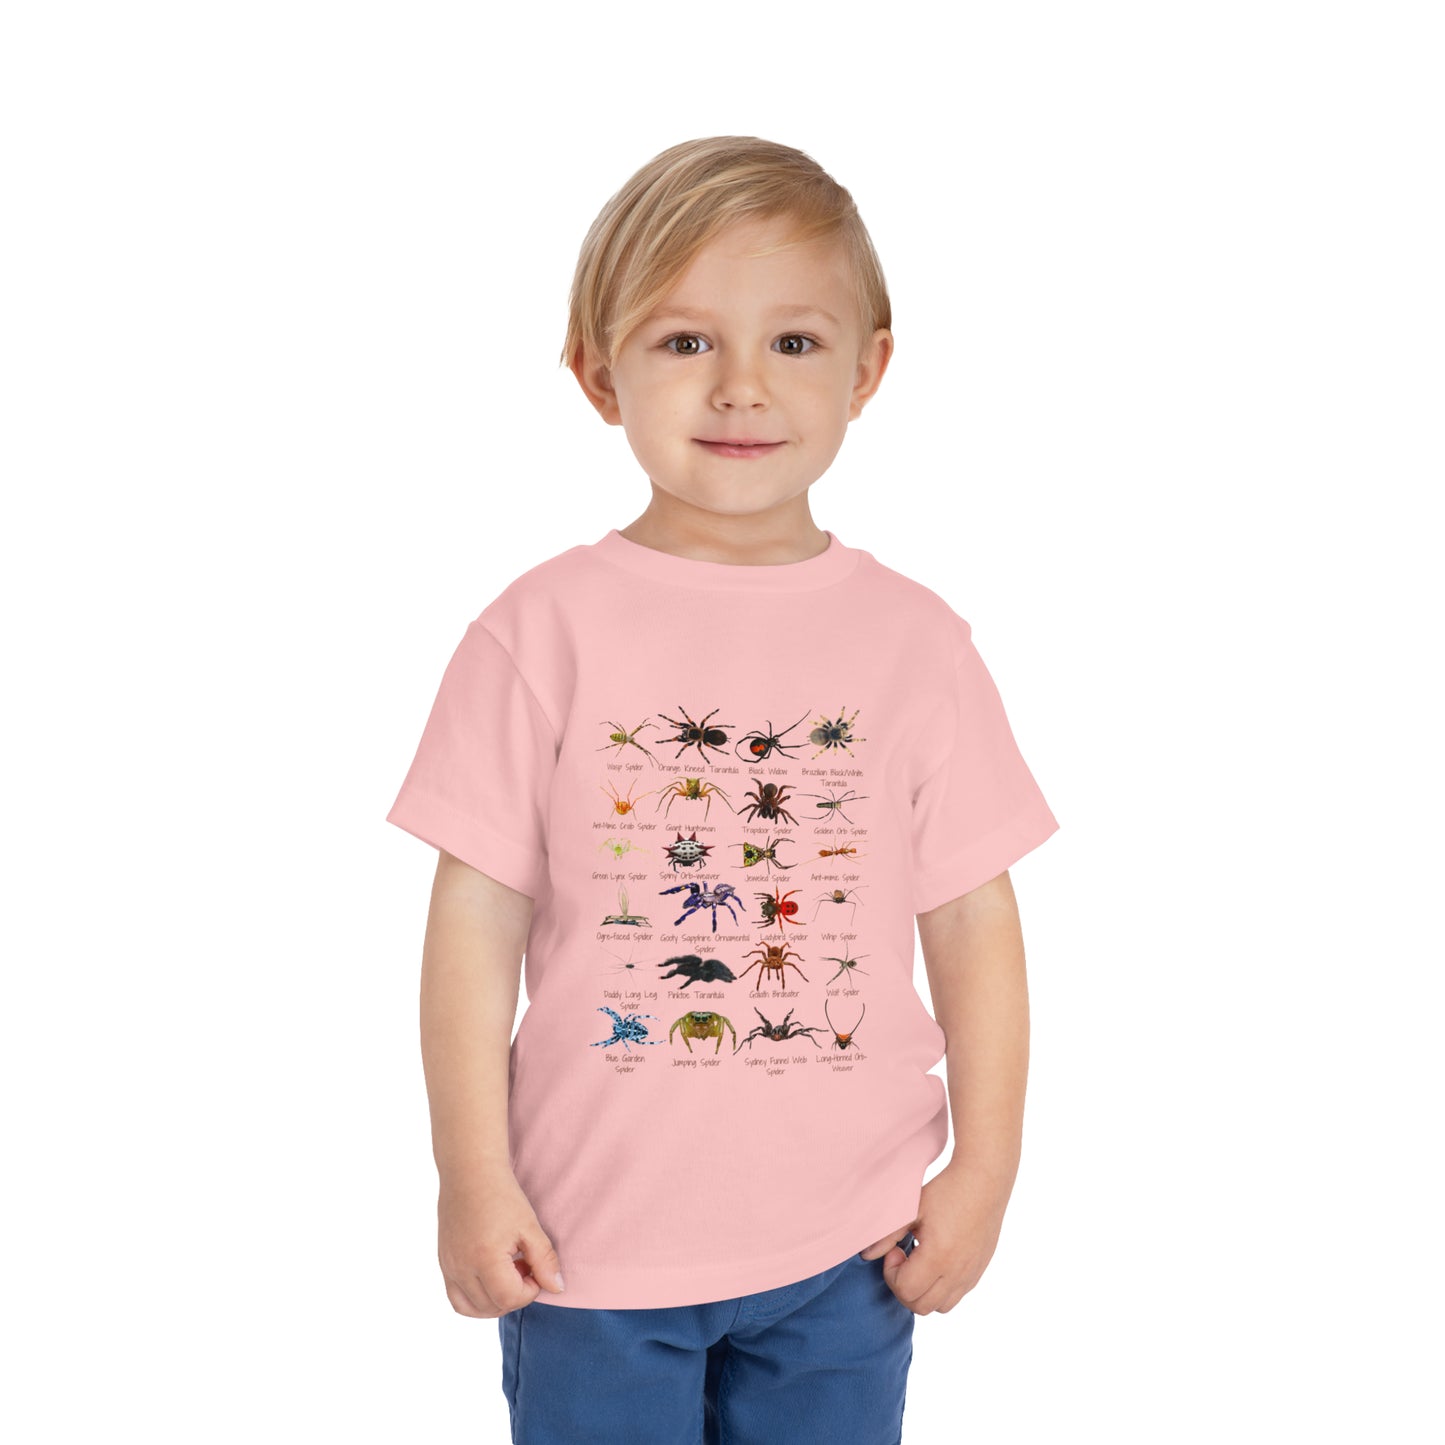 Stupendous Spiders Toddler T-shirt